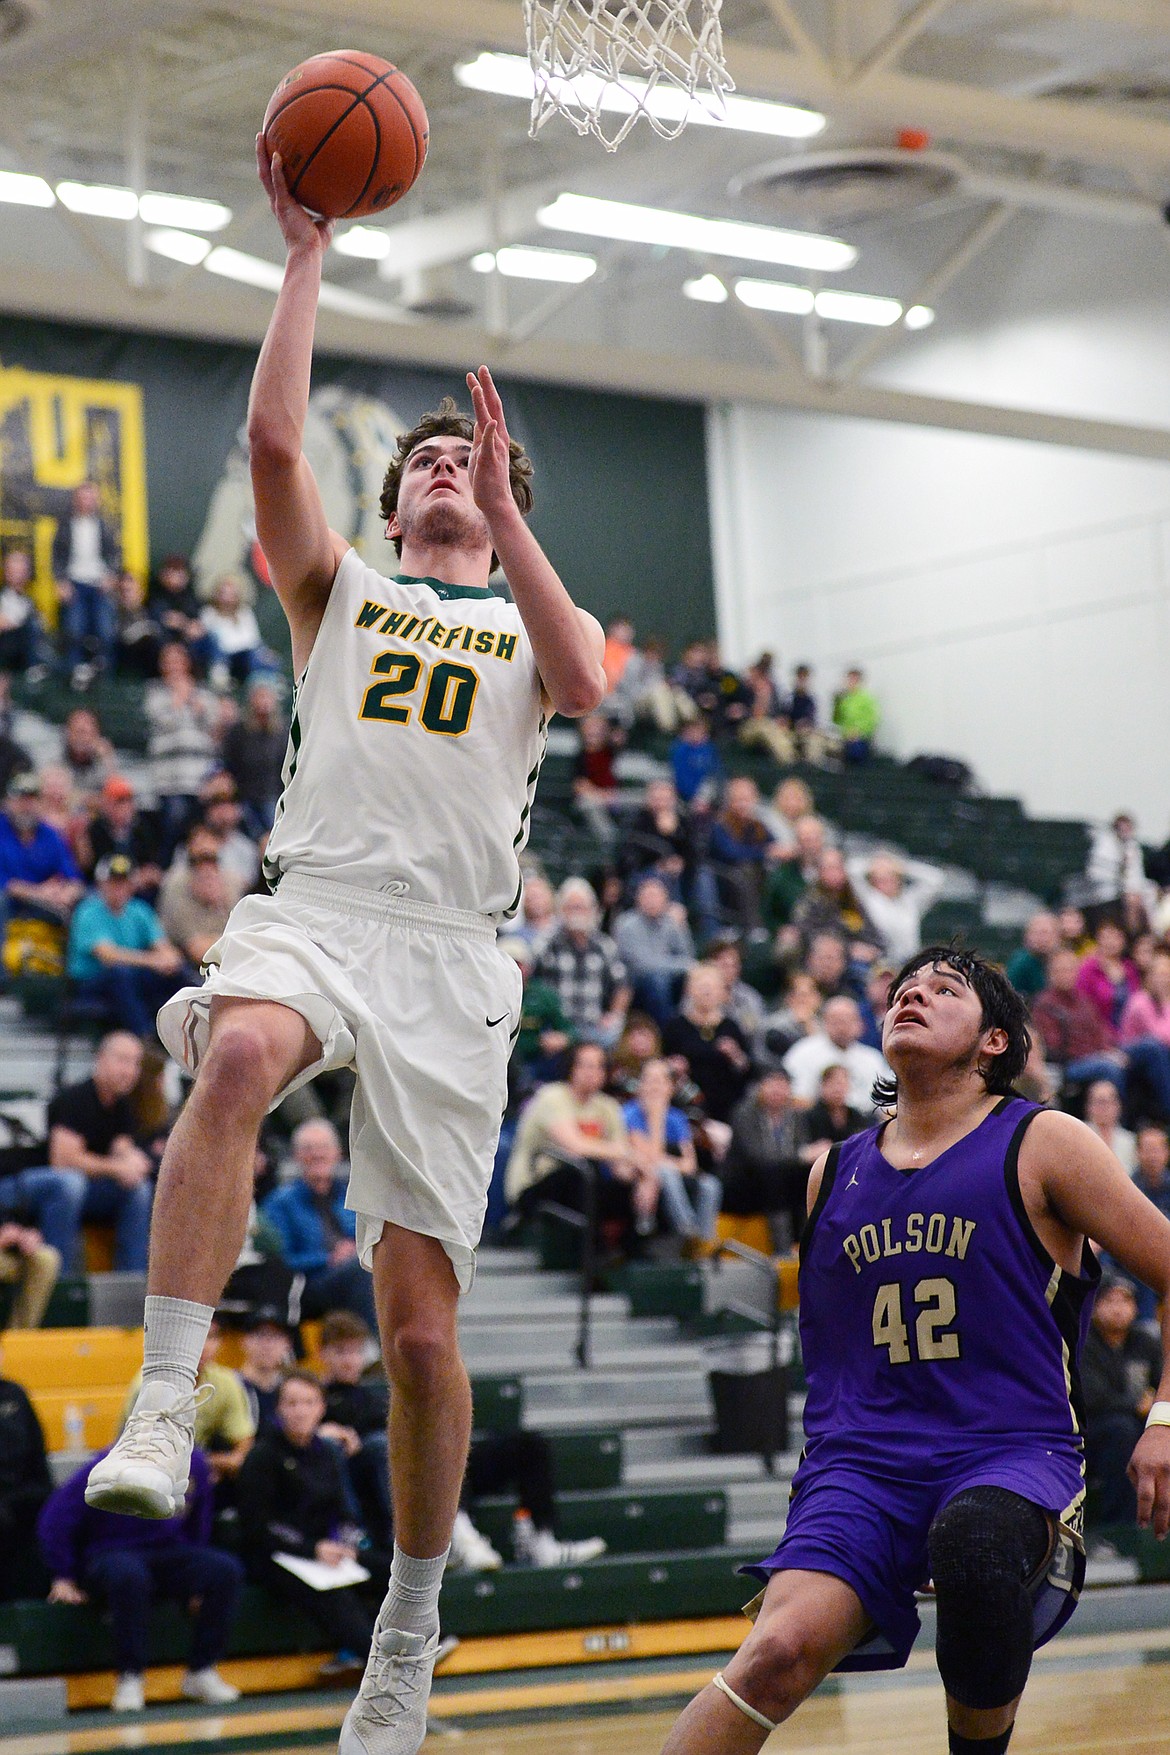 Whitefish's Sam Menicke (20) heads to the hoop for a layup in front of Polson's Kordell Walker (42) at Whitefish High School on Friday. (Casey Kreider/Daily Inter Lake)